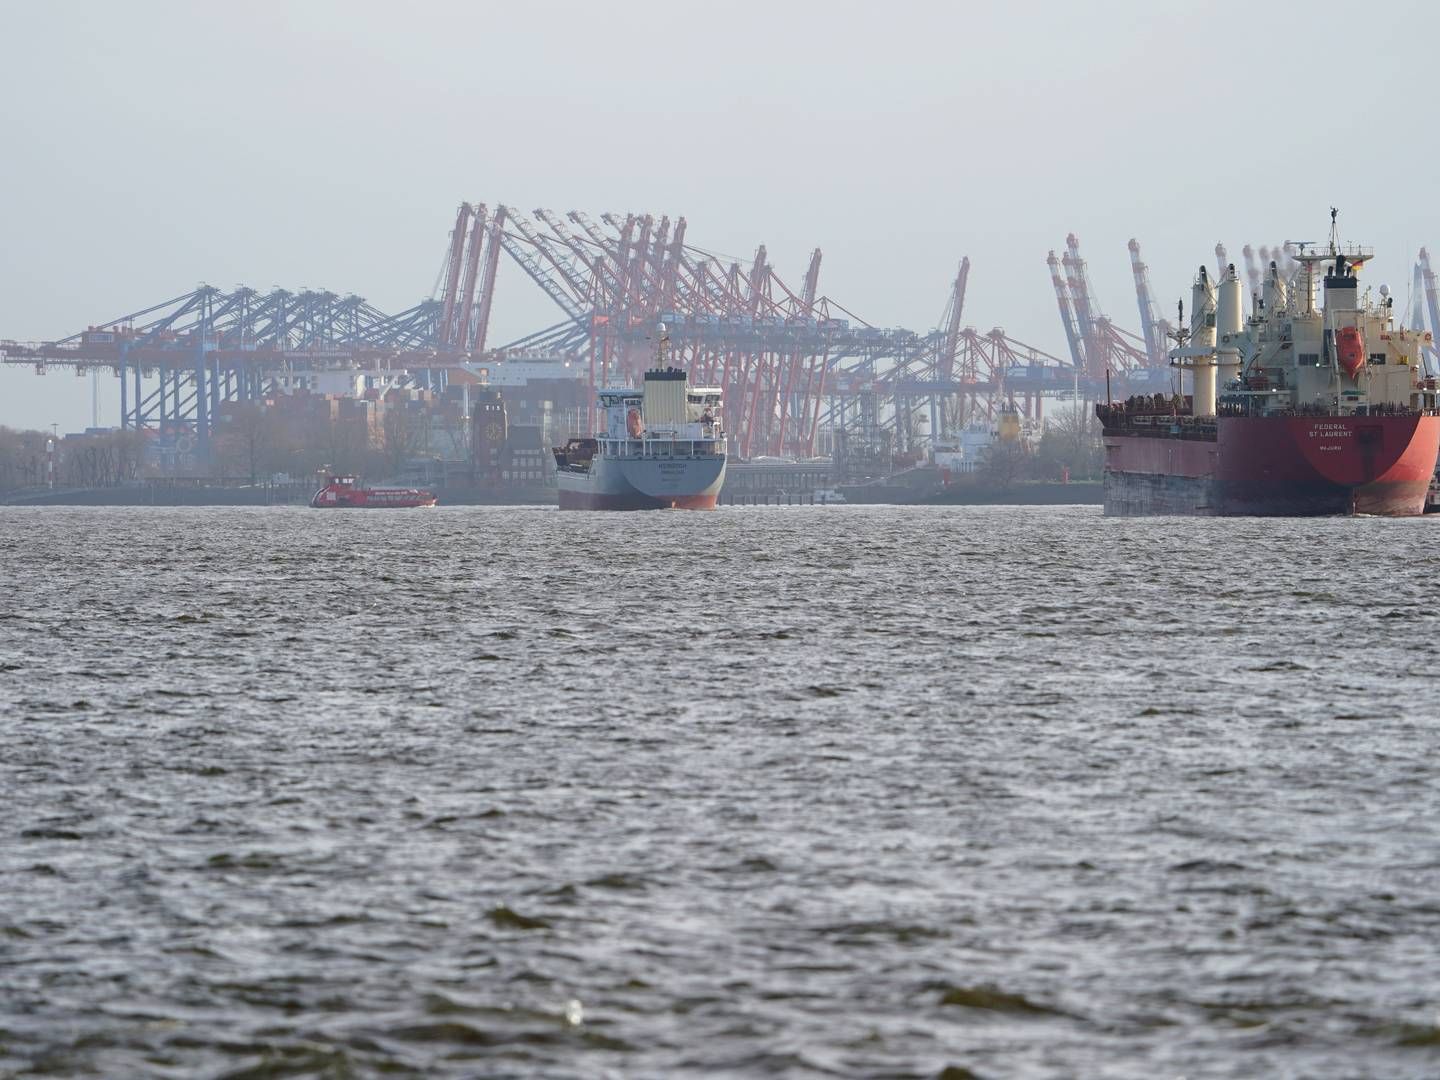 The long-term development of the Port of Hamburg must be much better secured through public investment, according to regional business organizations. | Photo: Marcus Brandt/AP/Ritzau Scanpix